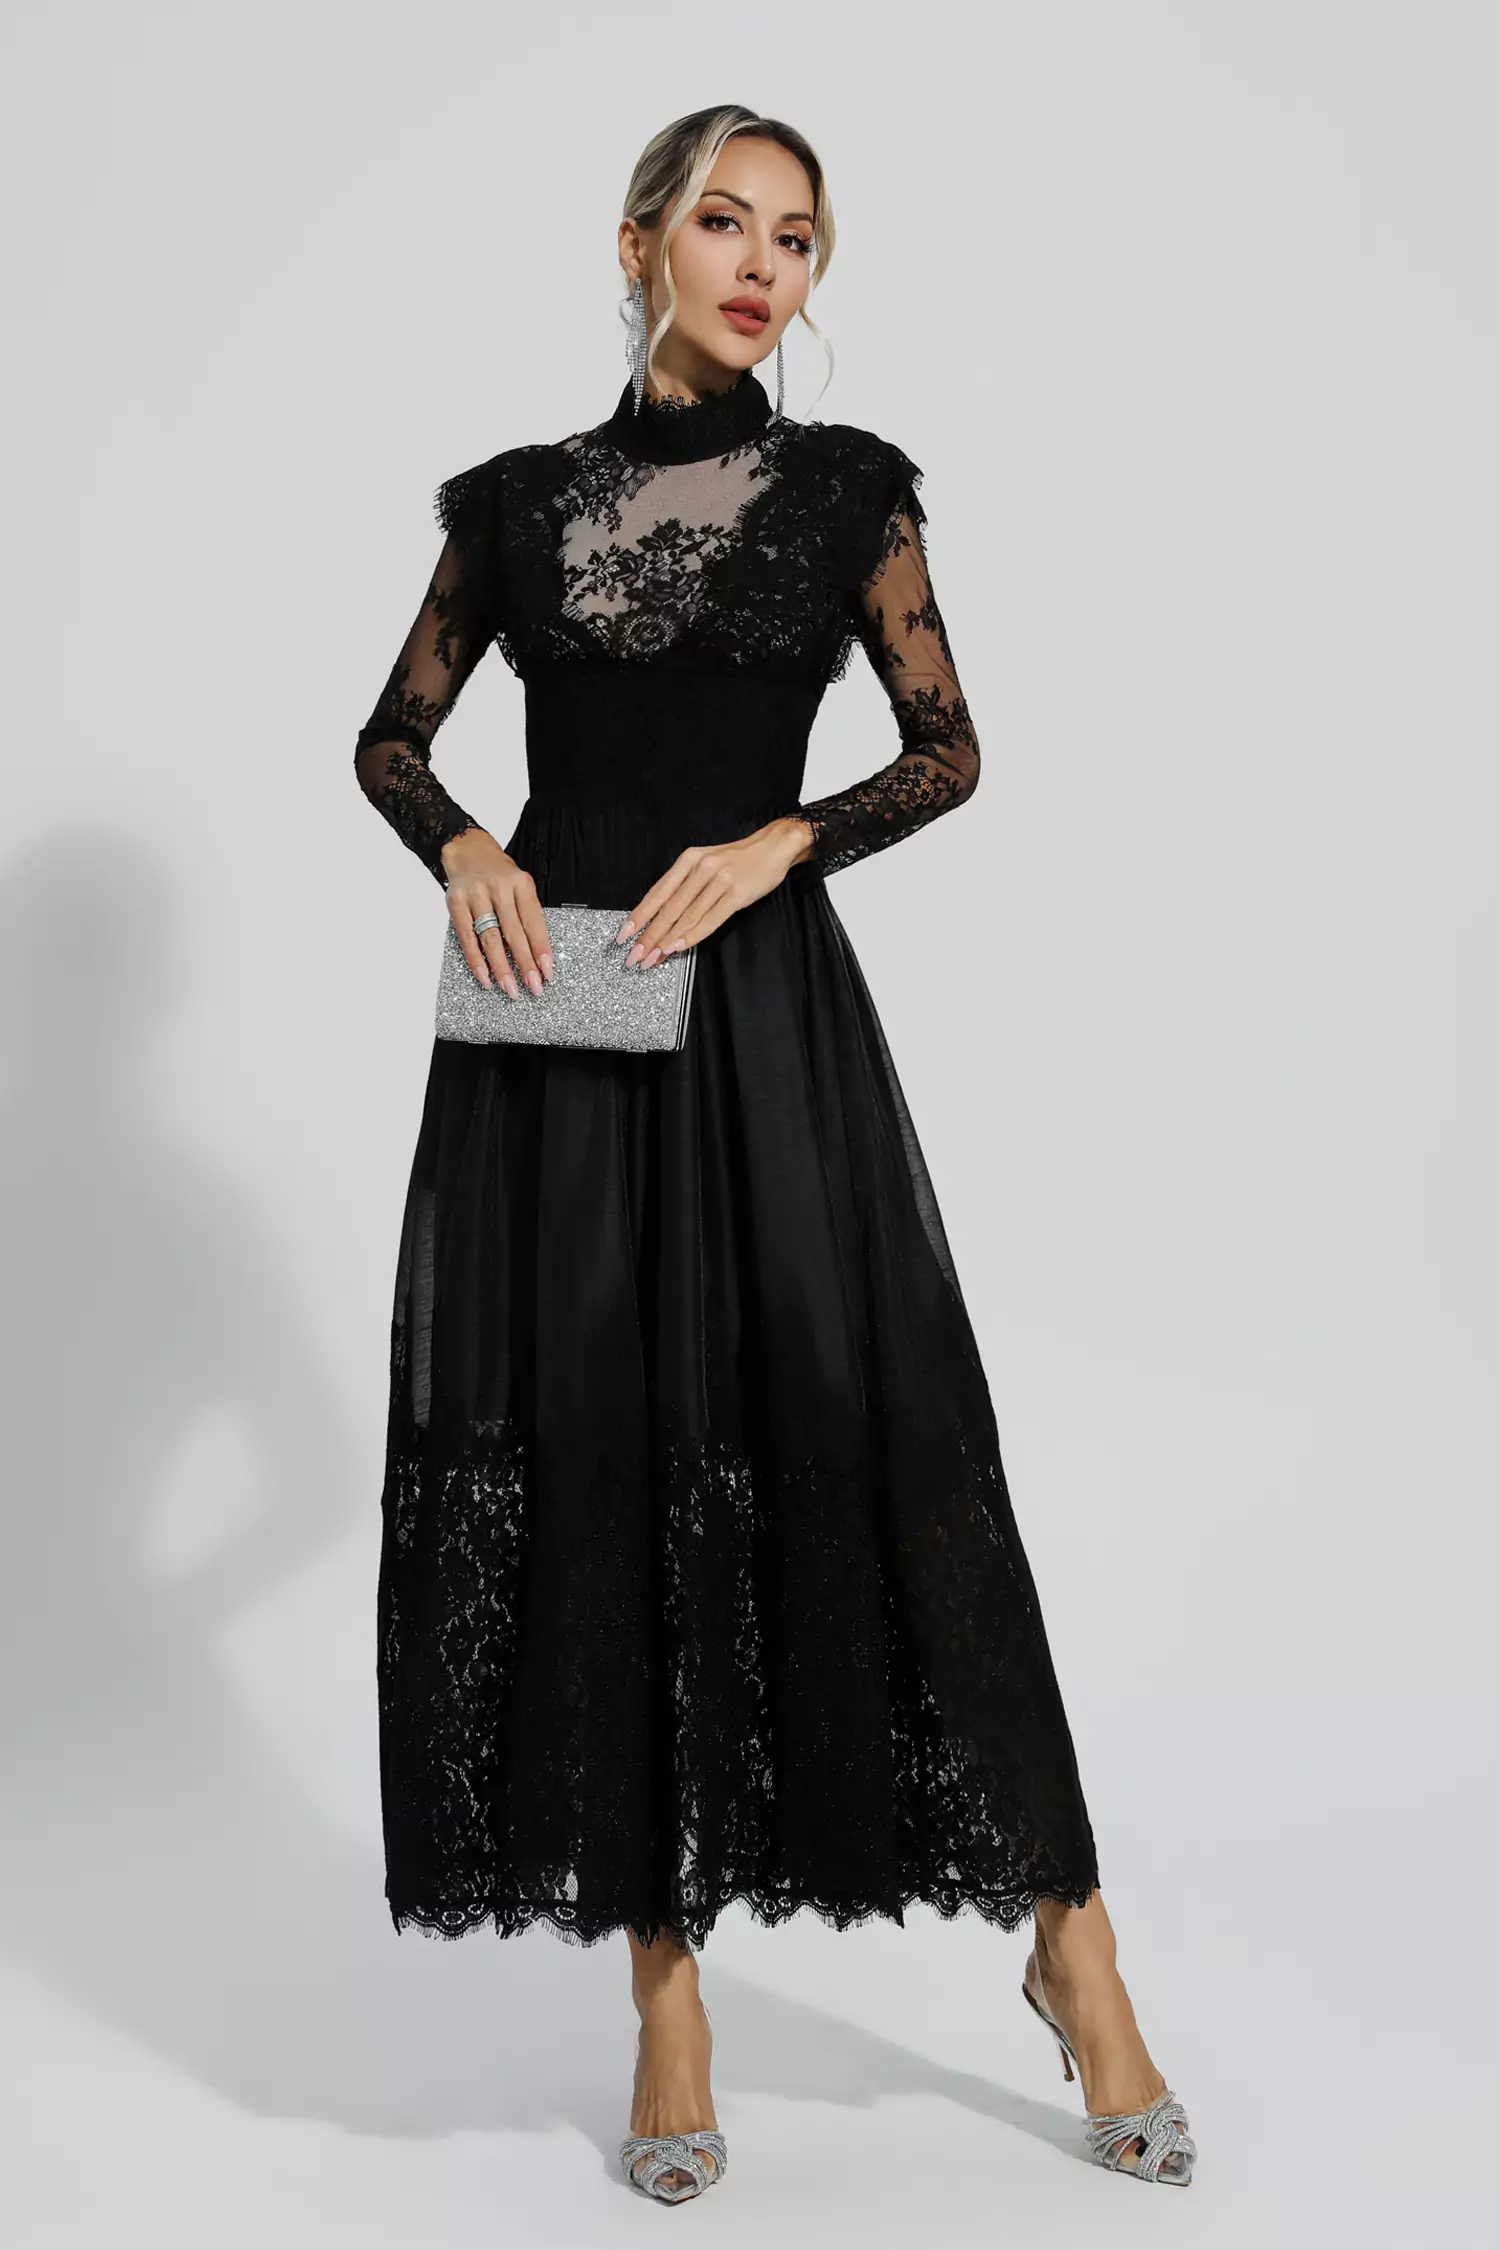 Jamie Black Floral Lace Stitching Long Sleeve Dress